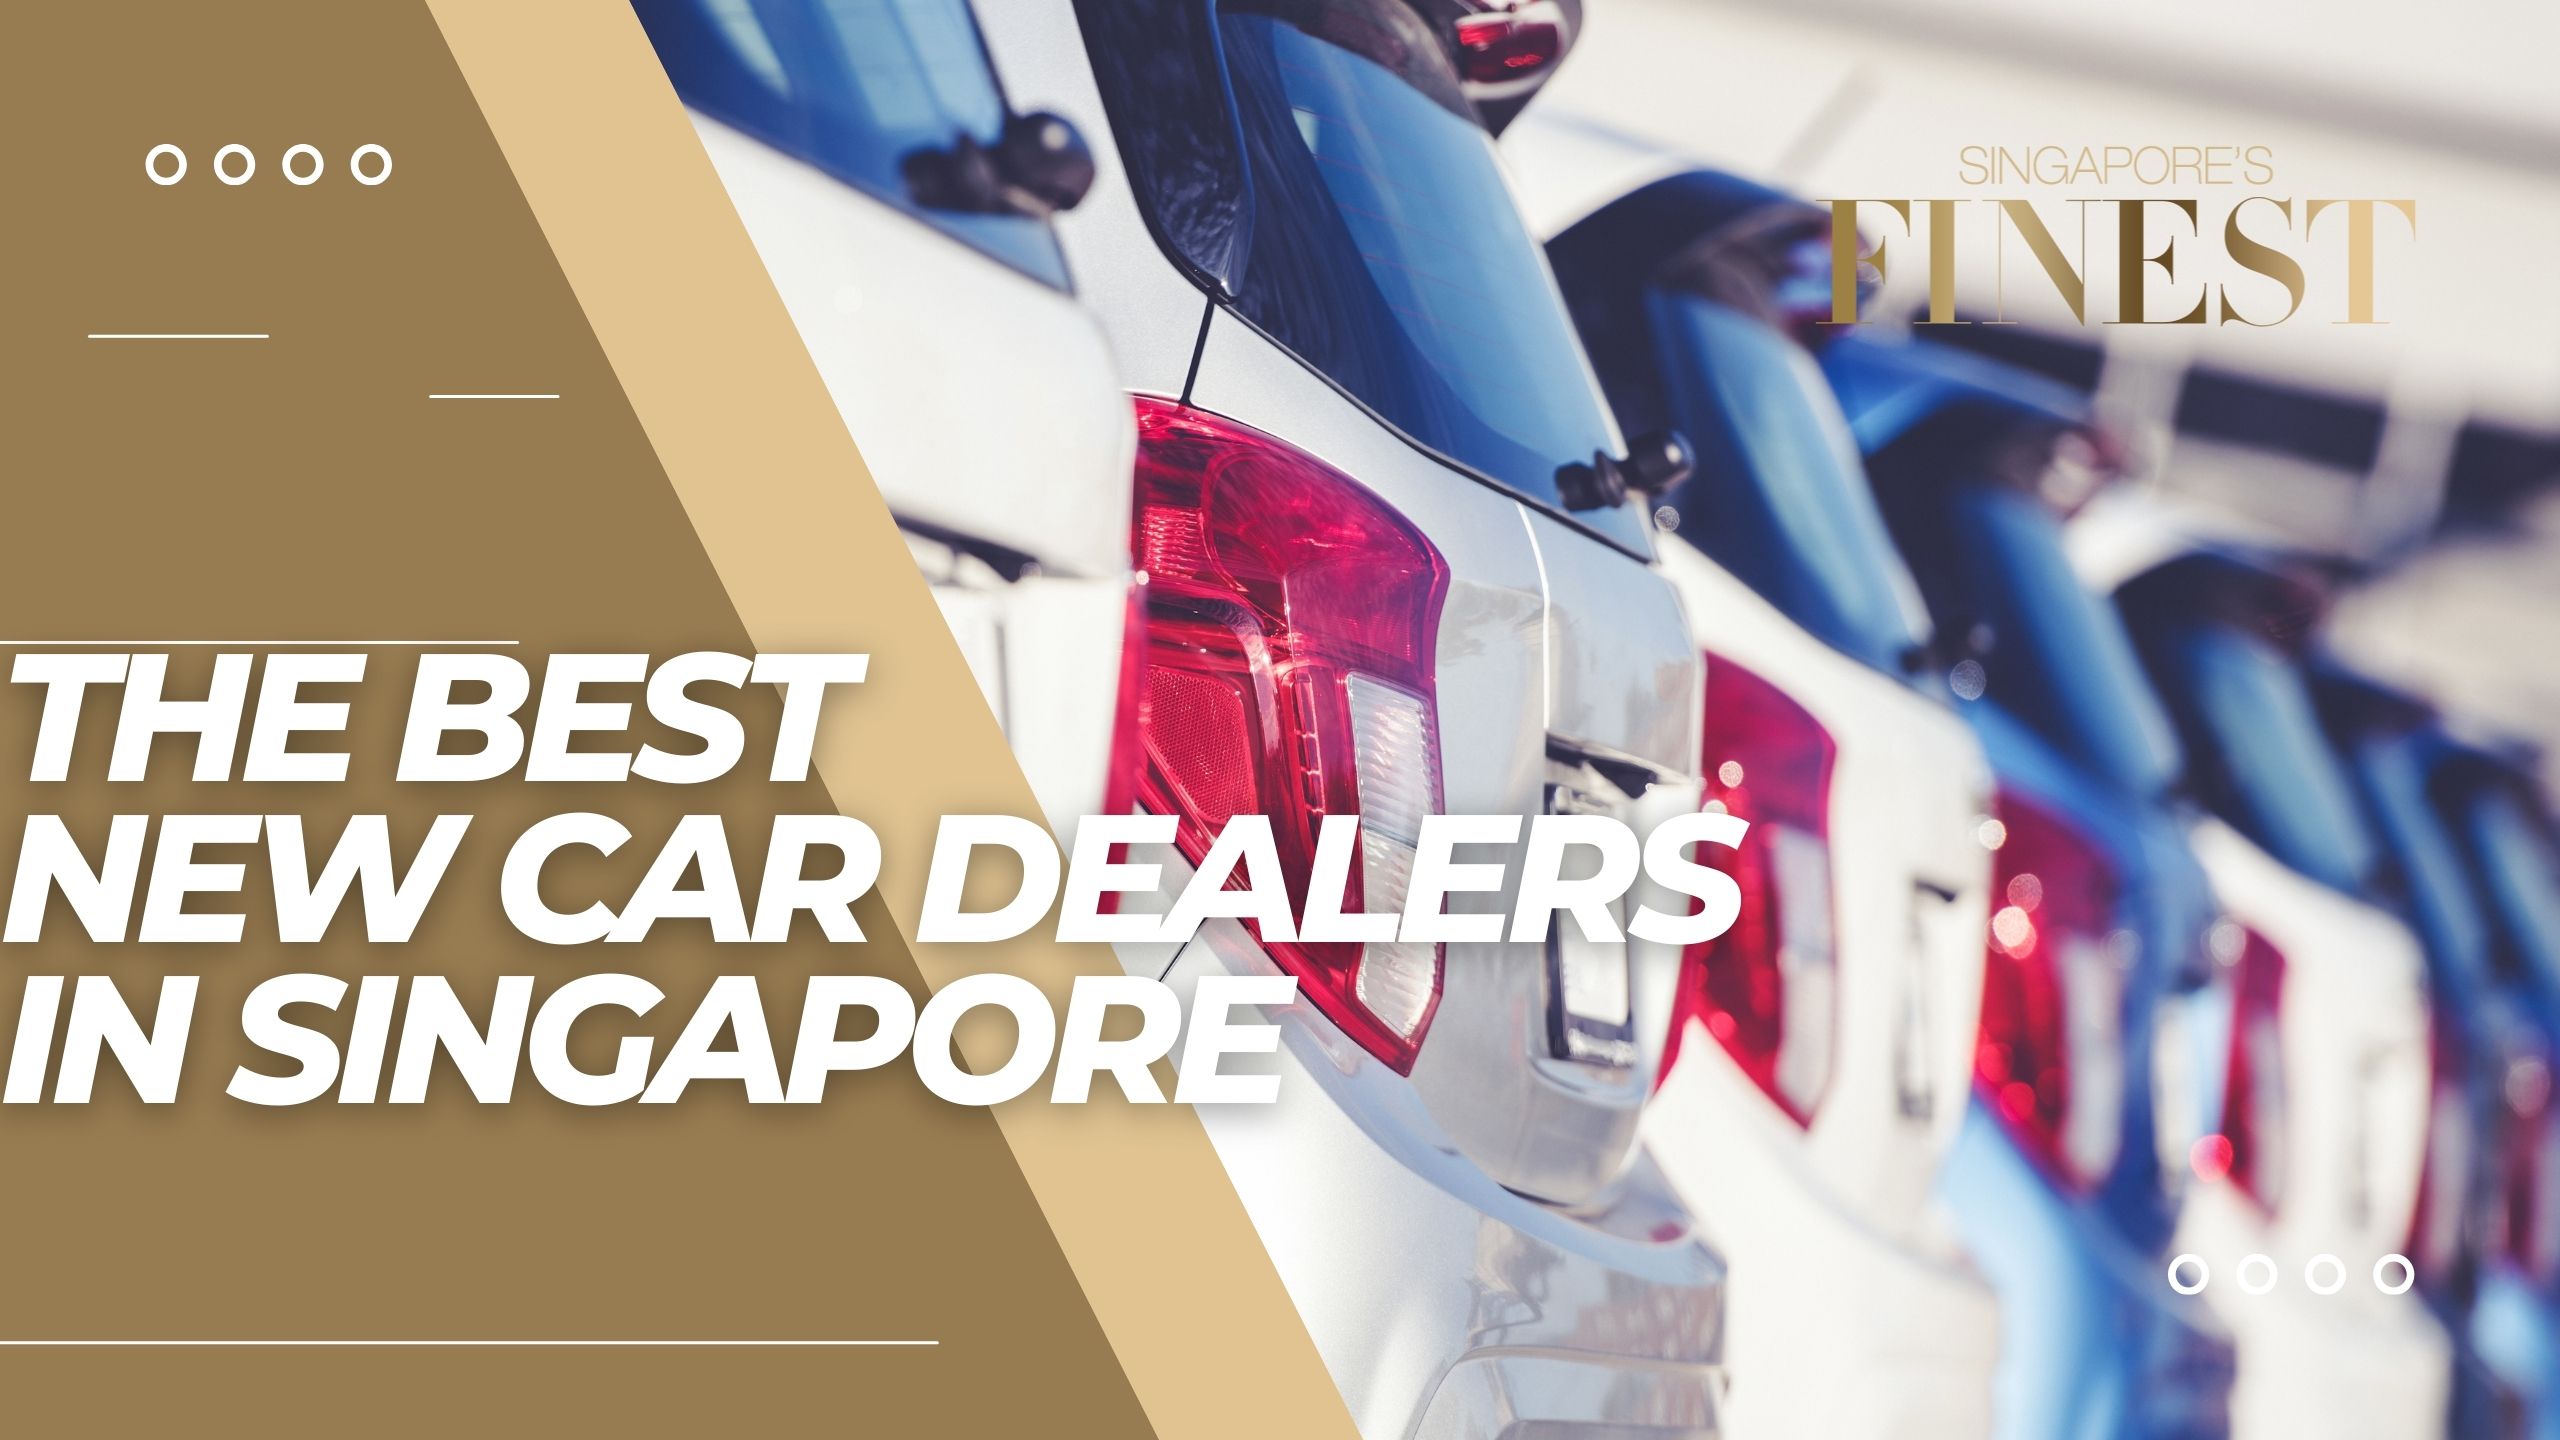 The Finest New Car Dealers in Singapore